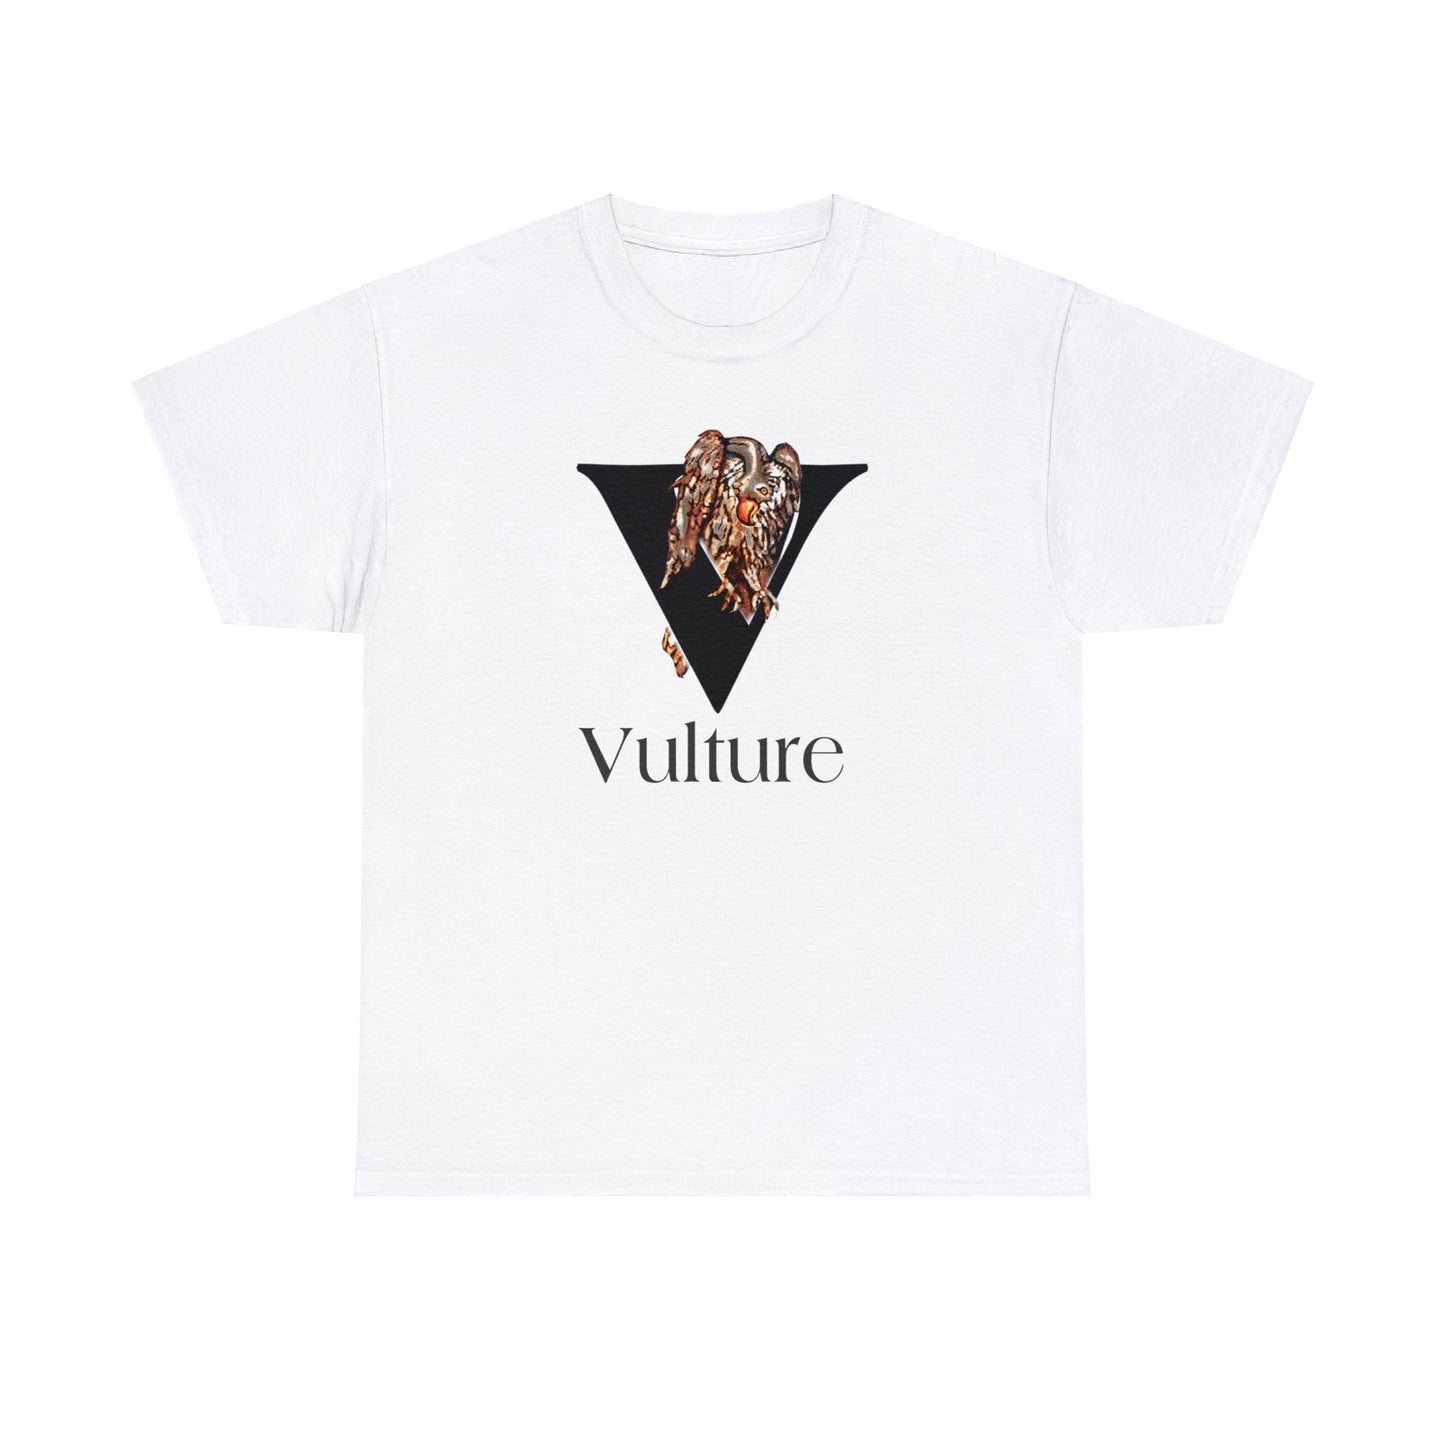 V is for Vulture, Vulture Drawing, Vulture T-Shirt, animal t-shirt, Vulture lovers shirt,